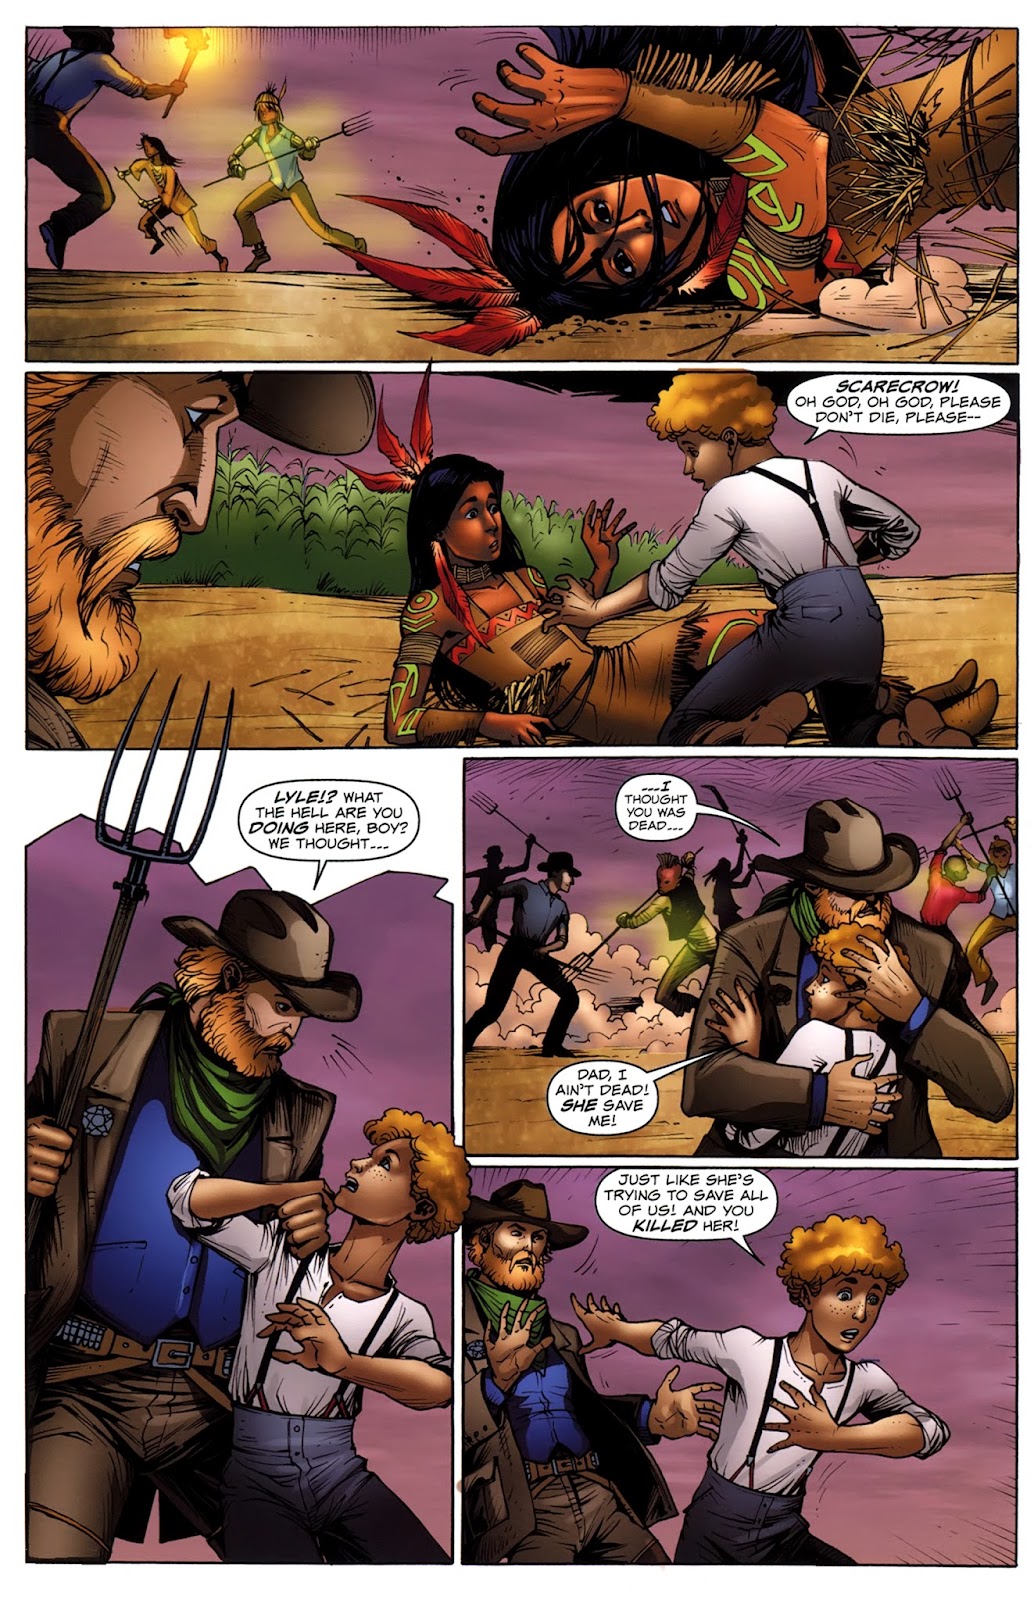 Legends of Oz: The Scarecrow issue 2 - Page 9